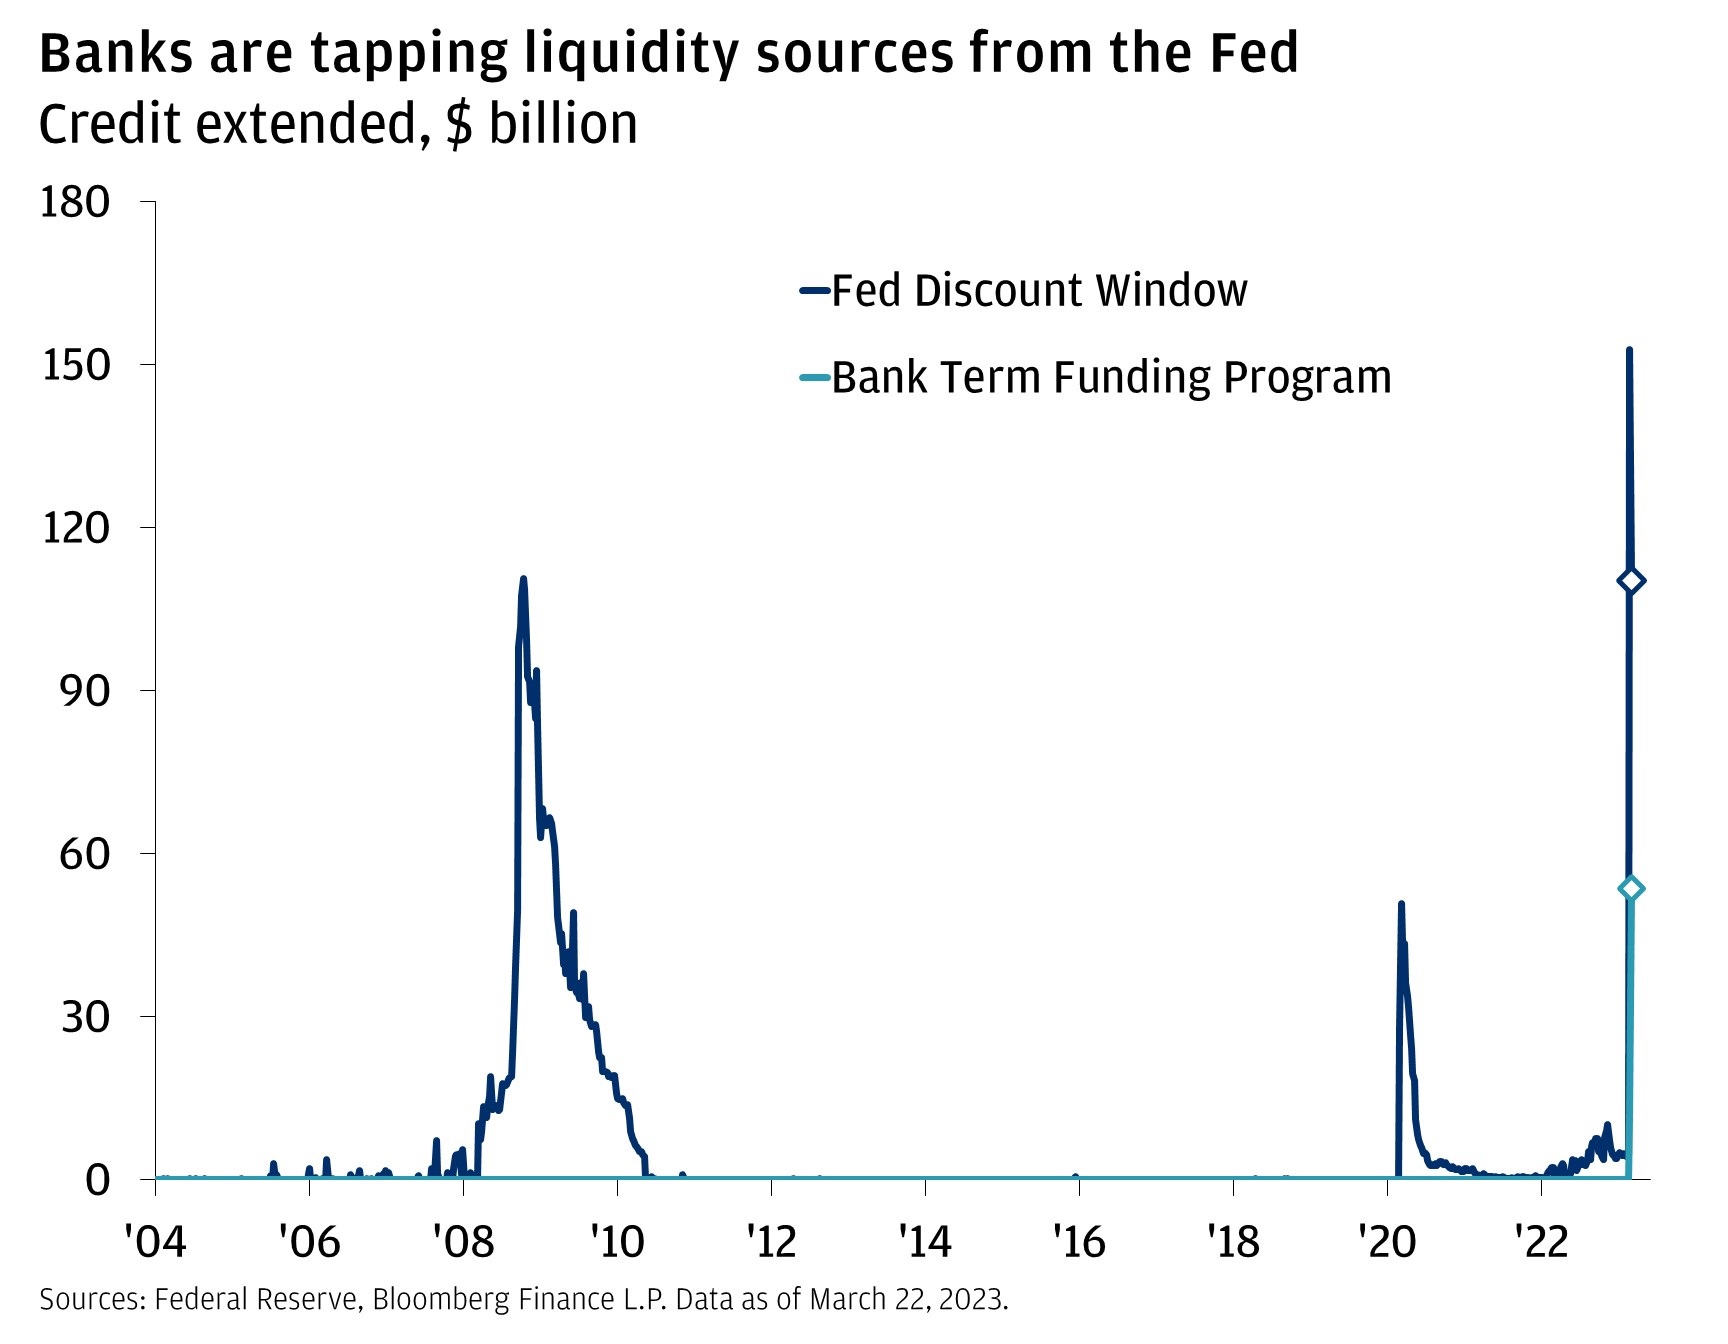 This chart describes the Federal Reserve’s discount window and how much the Fed lends out through its discount window. The unit is in $ billion.